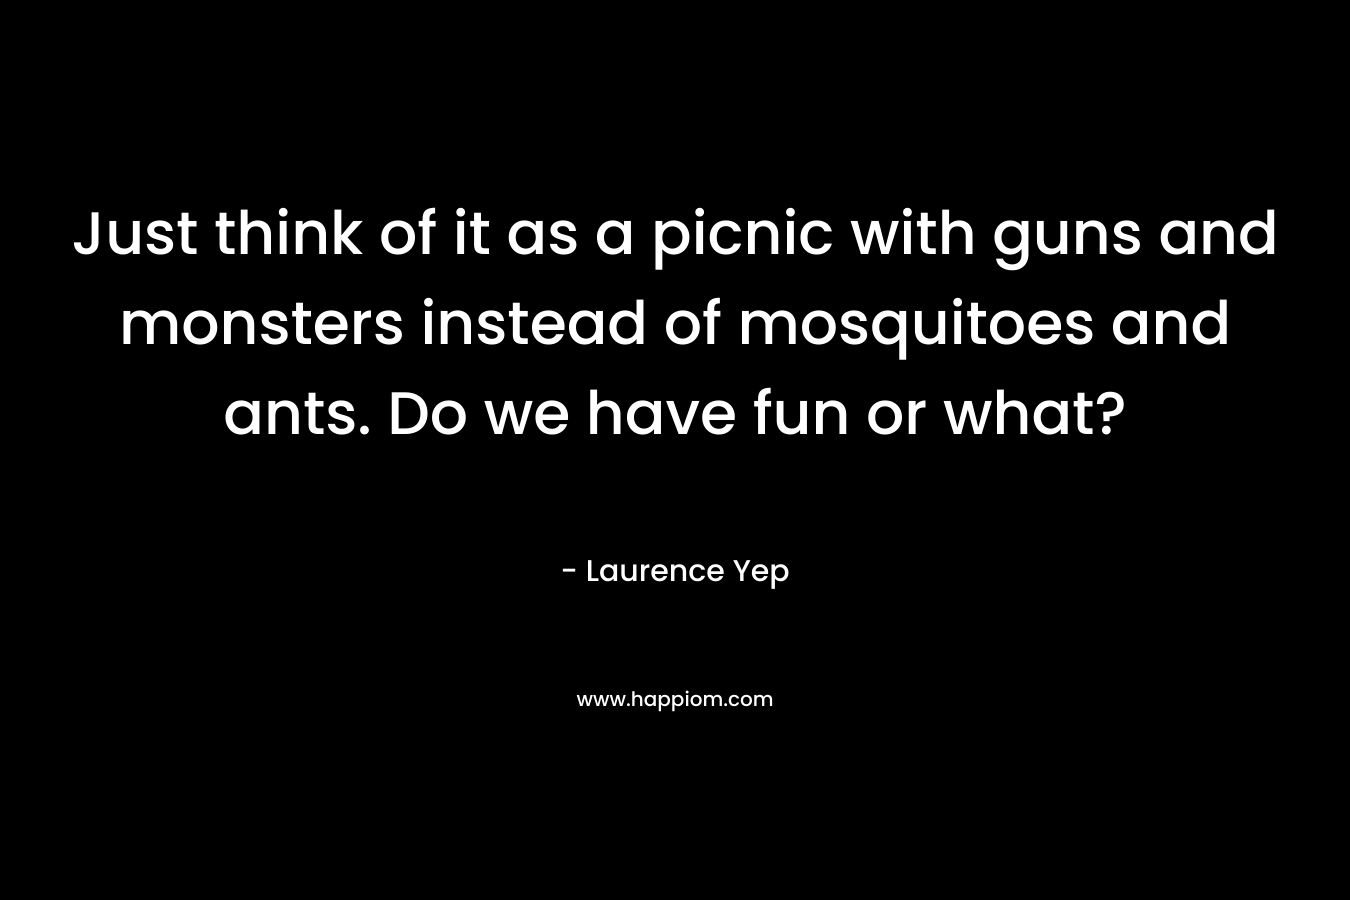 Just think of it as a picnic with guns and monsters instead of mosquitoes and ants. Do we have fun or what?